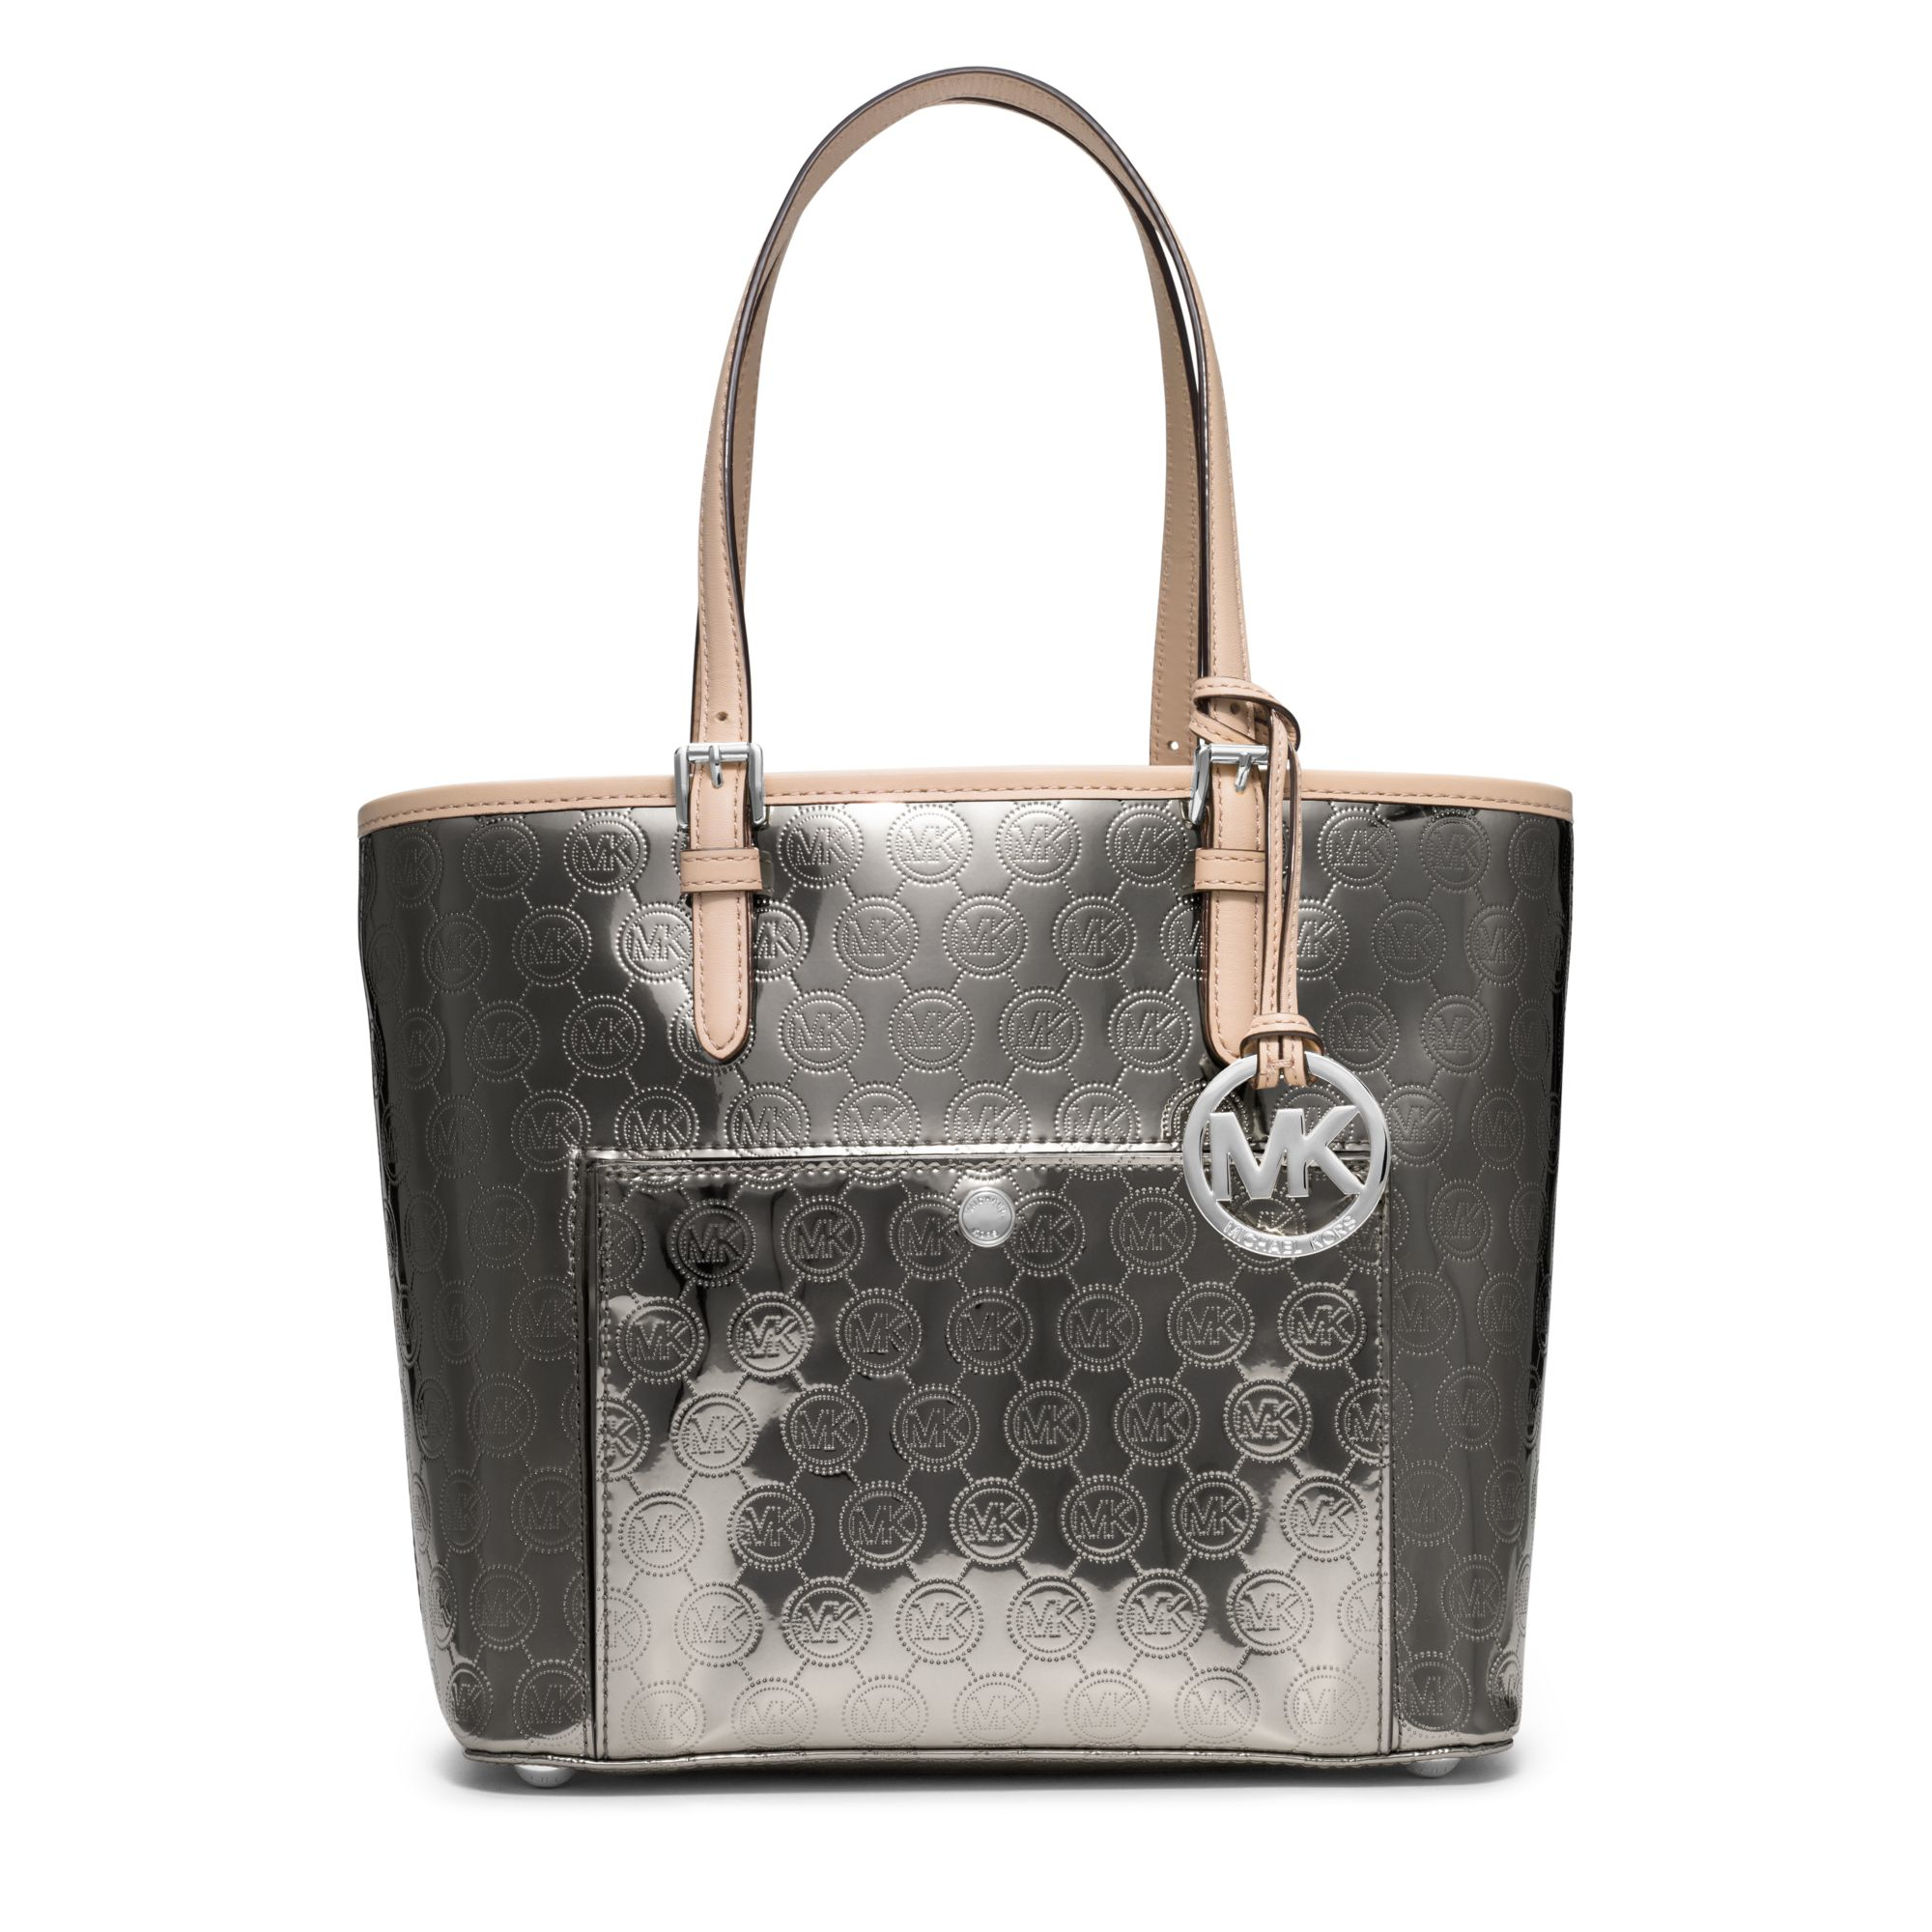 sequence Anyone obvious Michael Kors Jet Set Travel Medium Metallic Leather Tote in Gray | Lyst